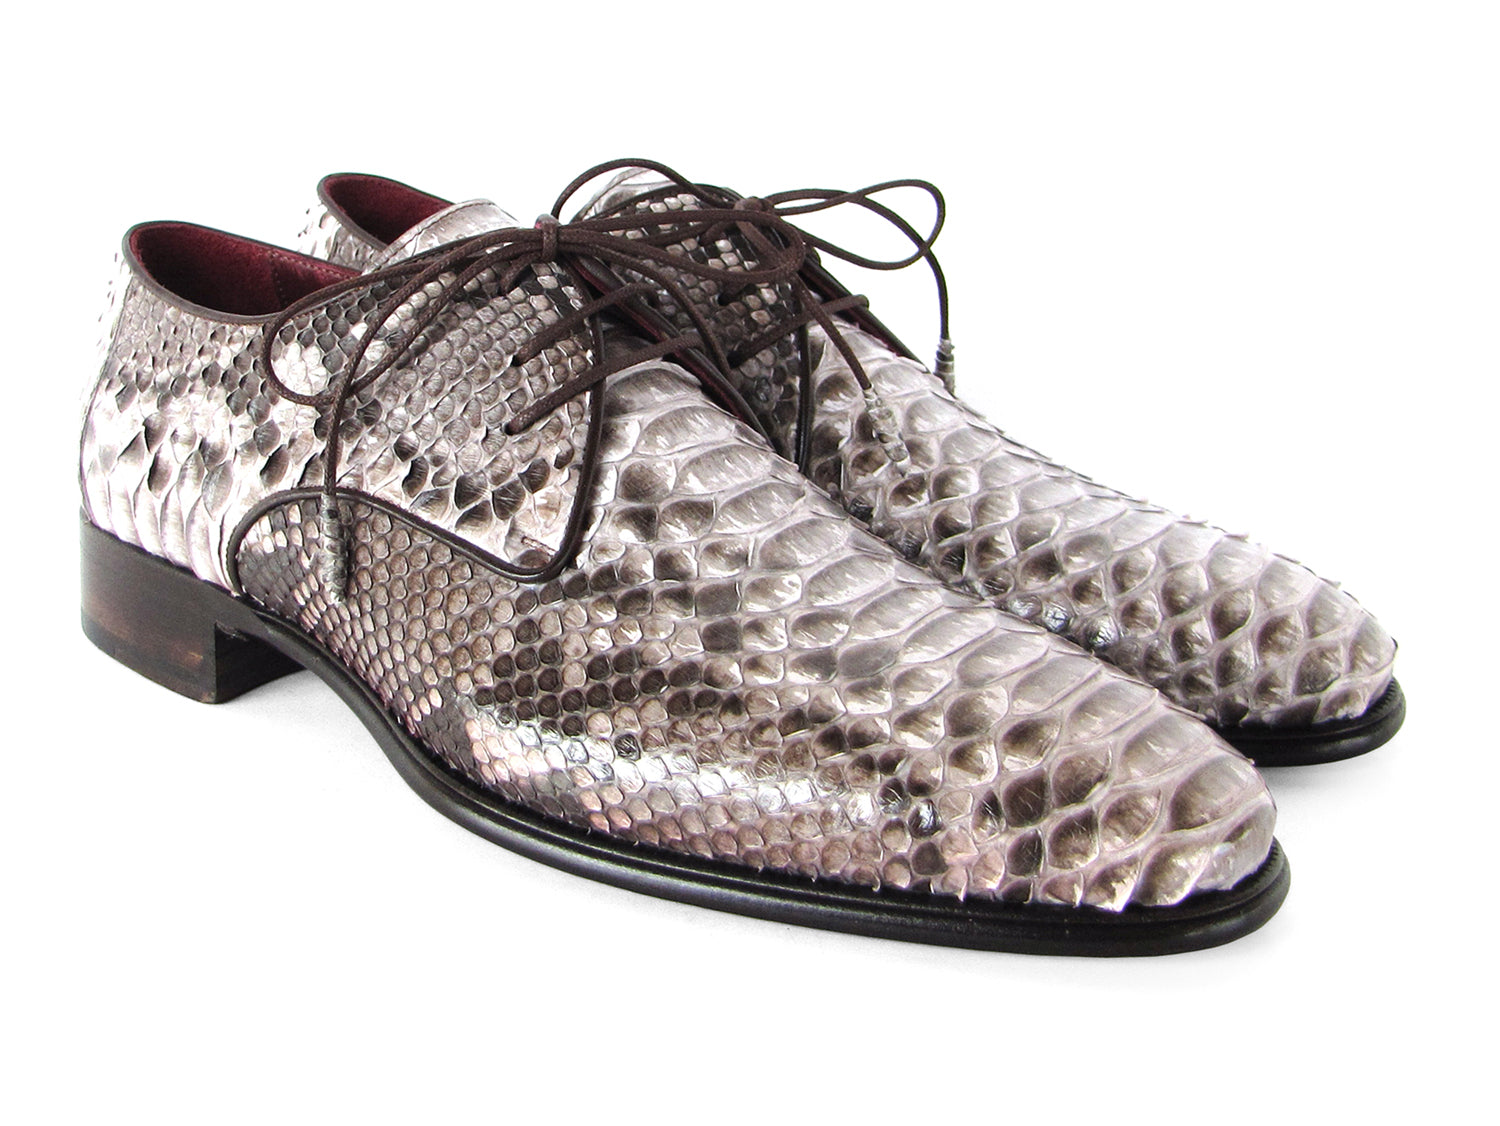 real snakeskin shoes